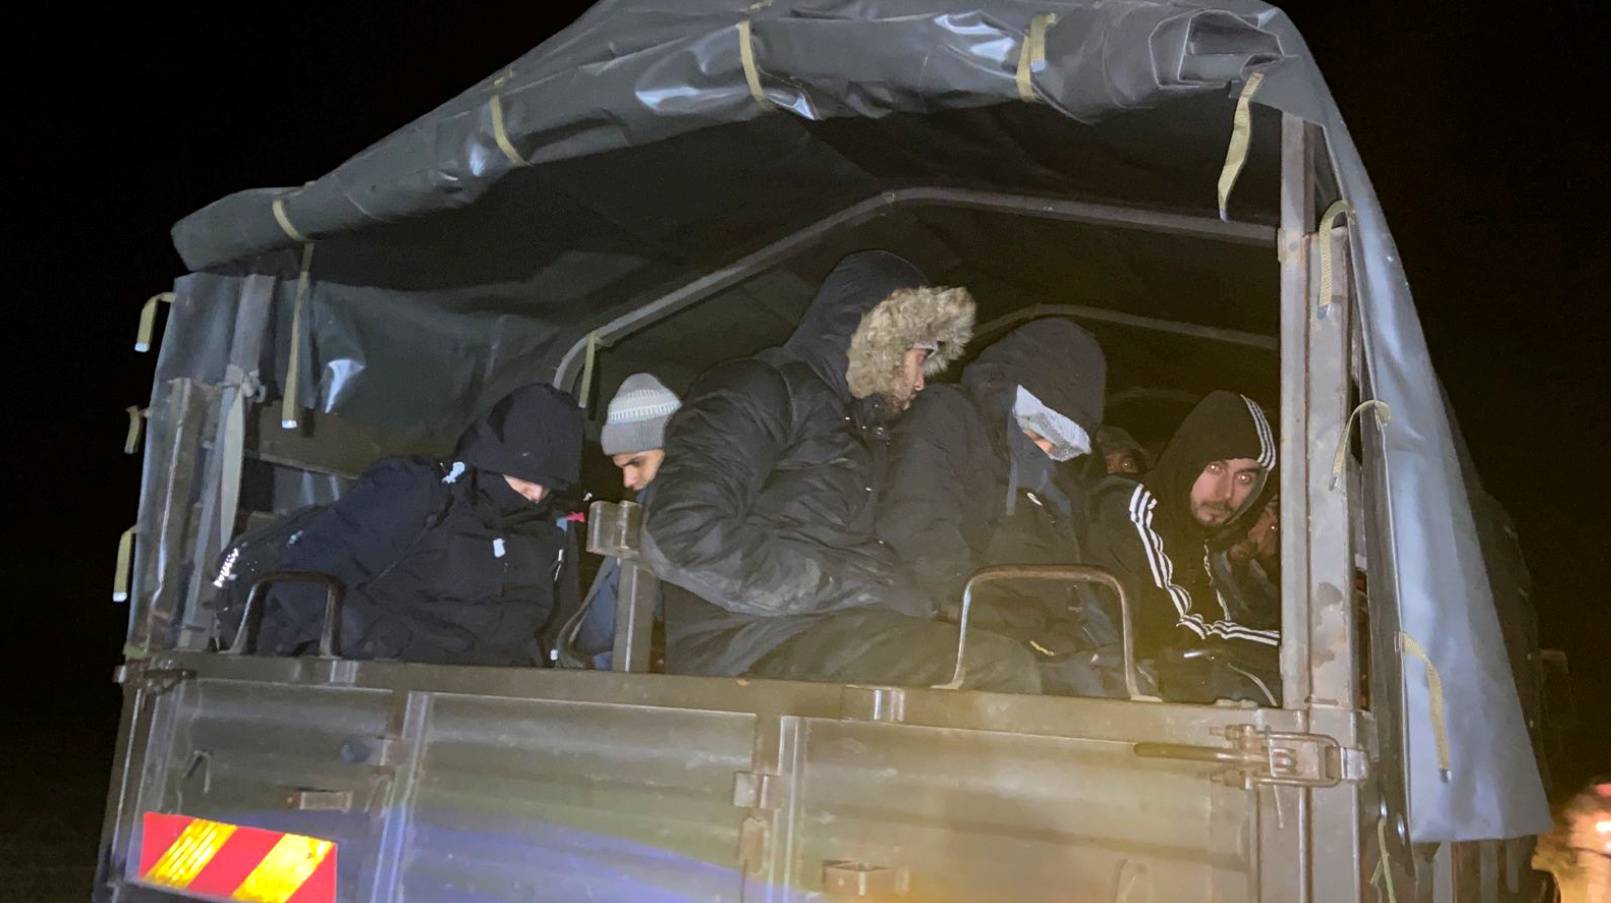 Migrants detained by Polish border guard wait in the military truck at the Poland/Belarus border near Kuznica